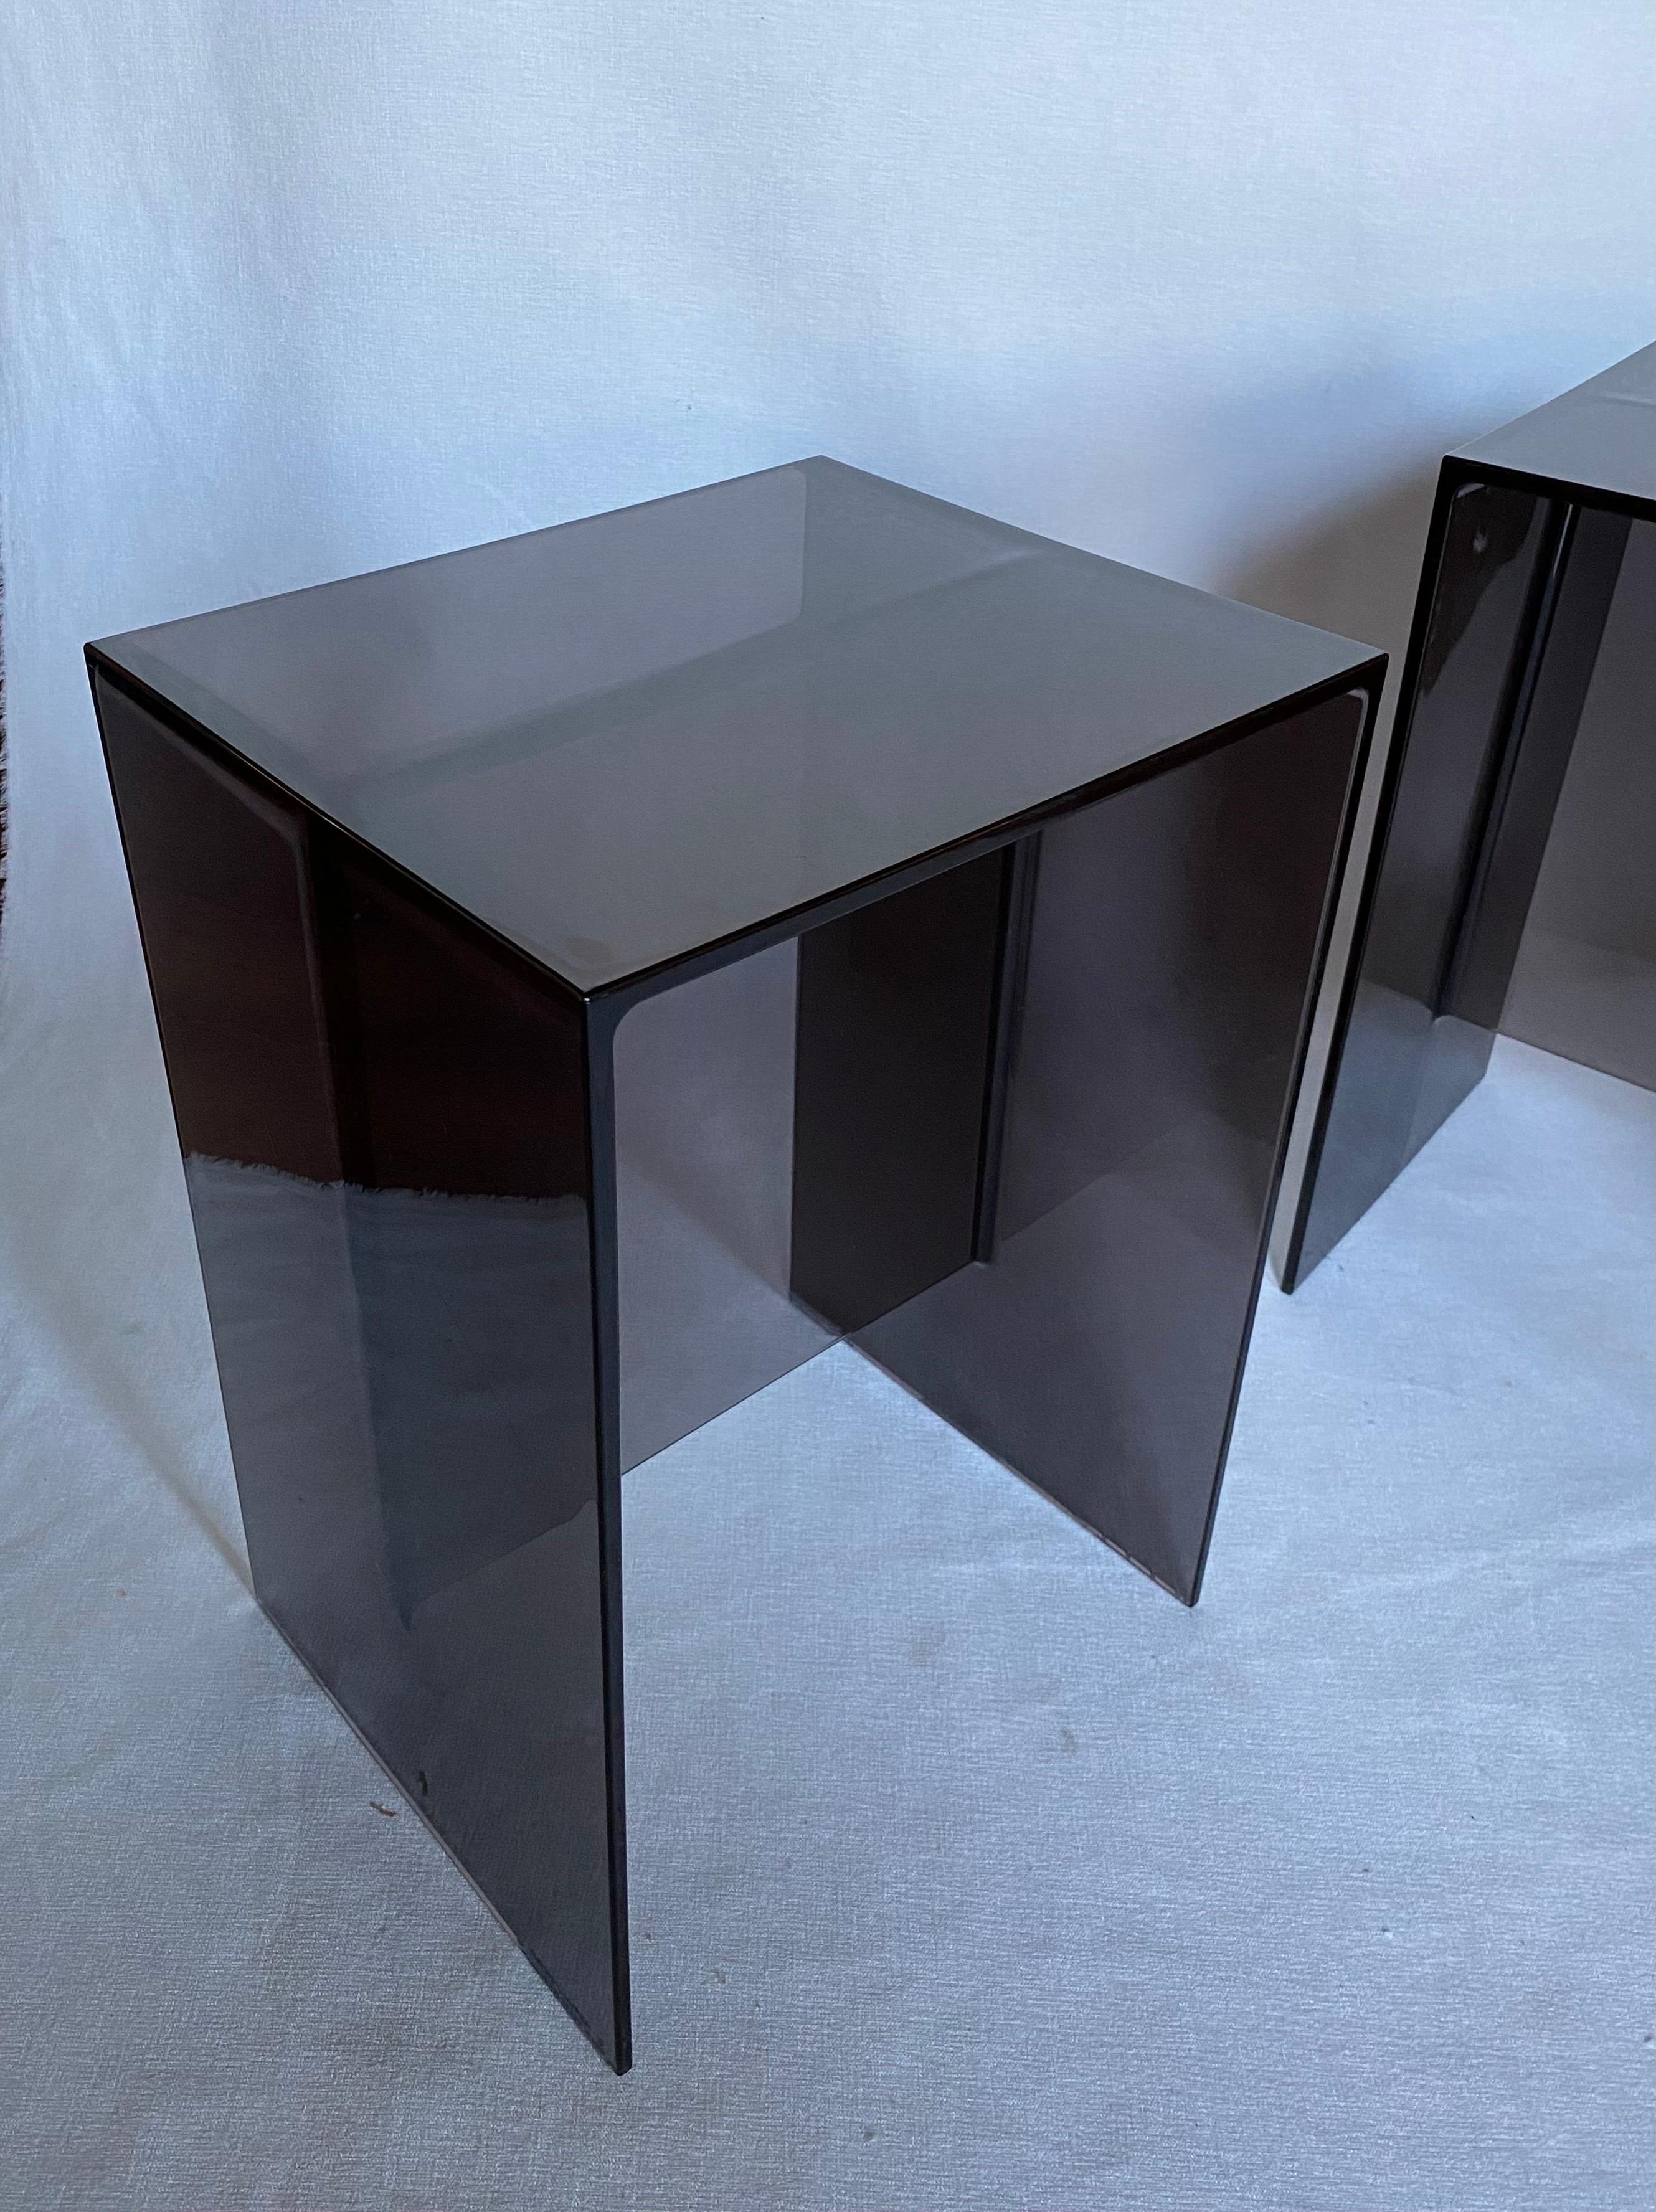 Molded Kartell Max-Beam Modern Acrylic Side Tables by Ludovica + Roberto Palomb, Italy For Sale